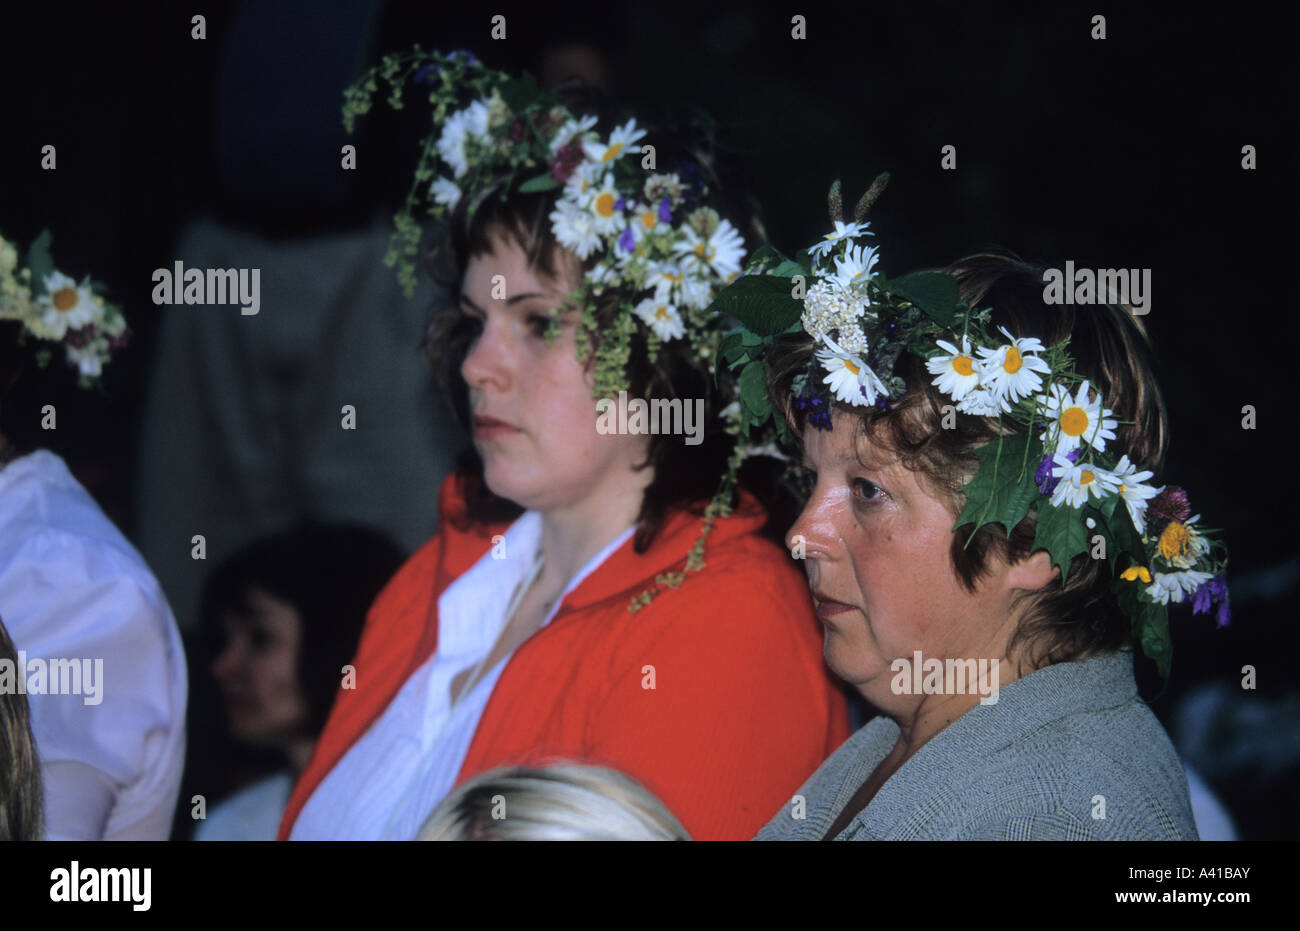 Latvian woman with garlands at summer solstice celebration Stock Photo